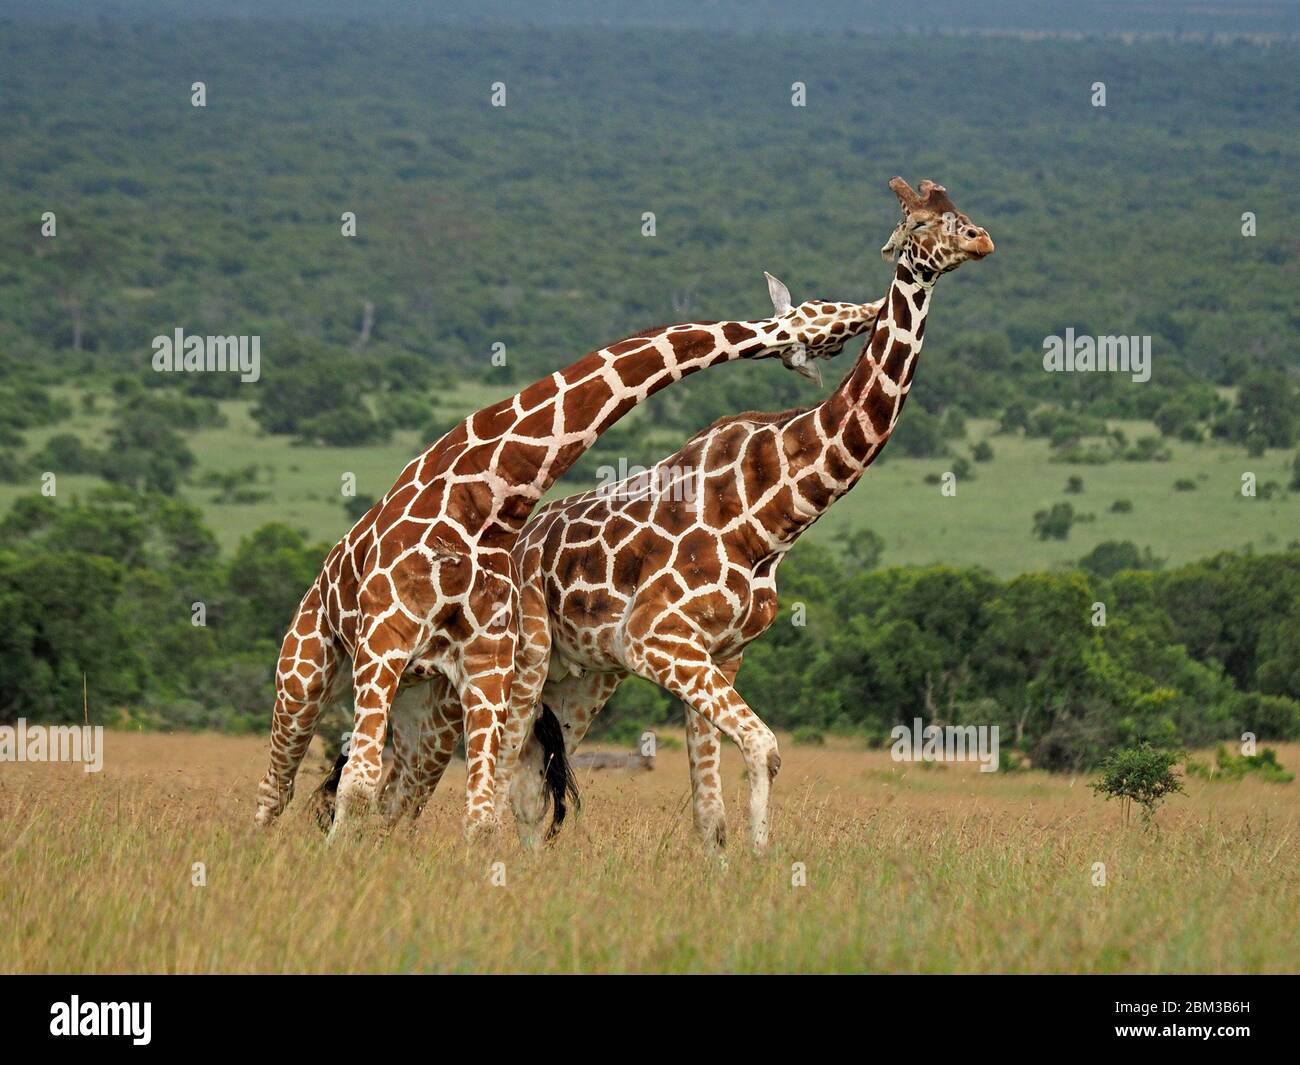 Two old bull Reticulated Giraffes (Giraffa camelopardis reticulata) fight over right to mate with female -Ol Pejeta Conservancy,Laikipia,Kenya, Africa Stock Photo